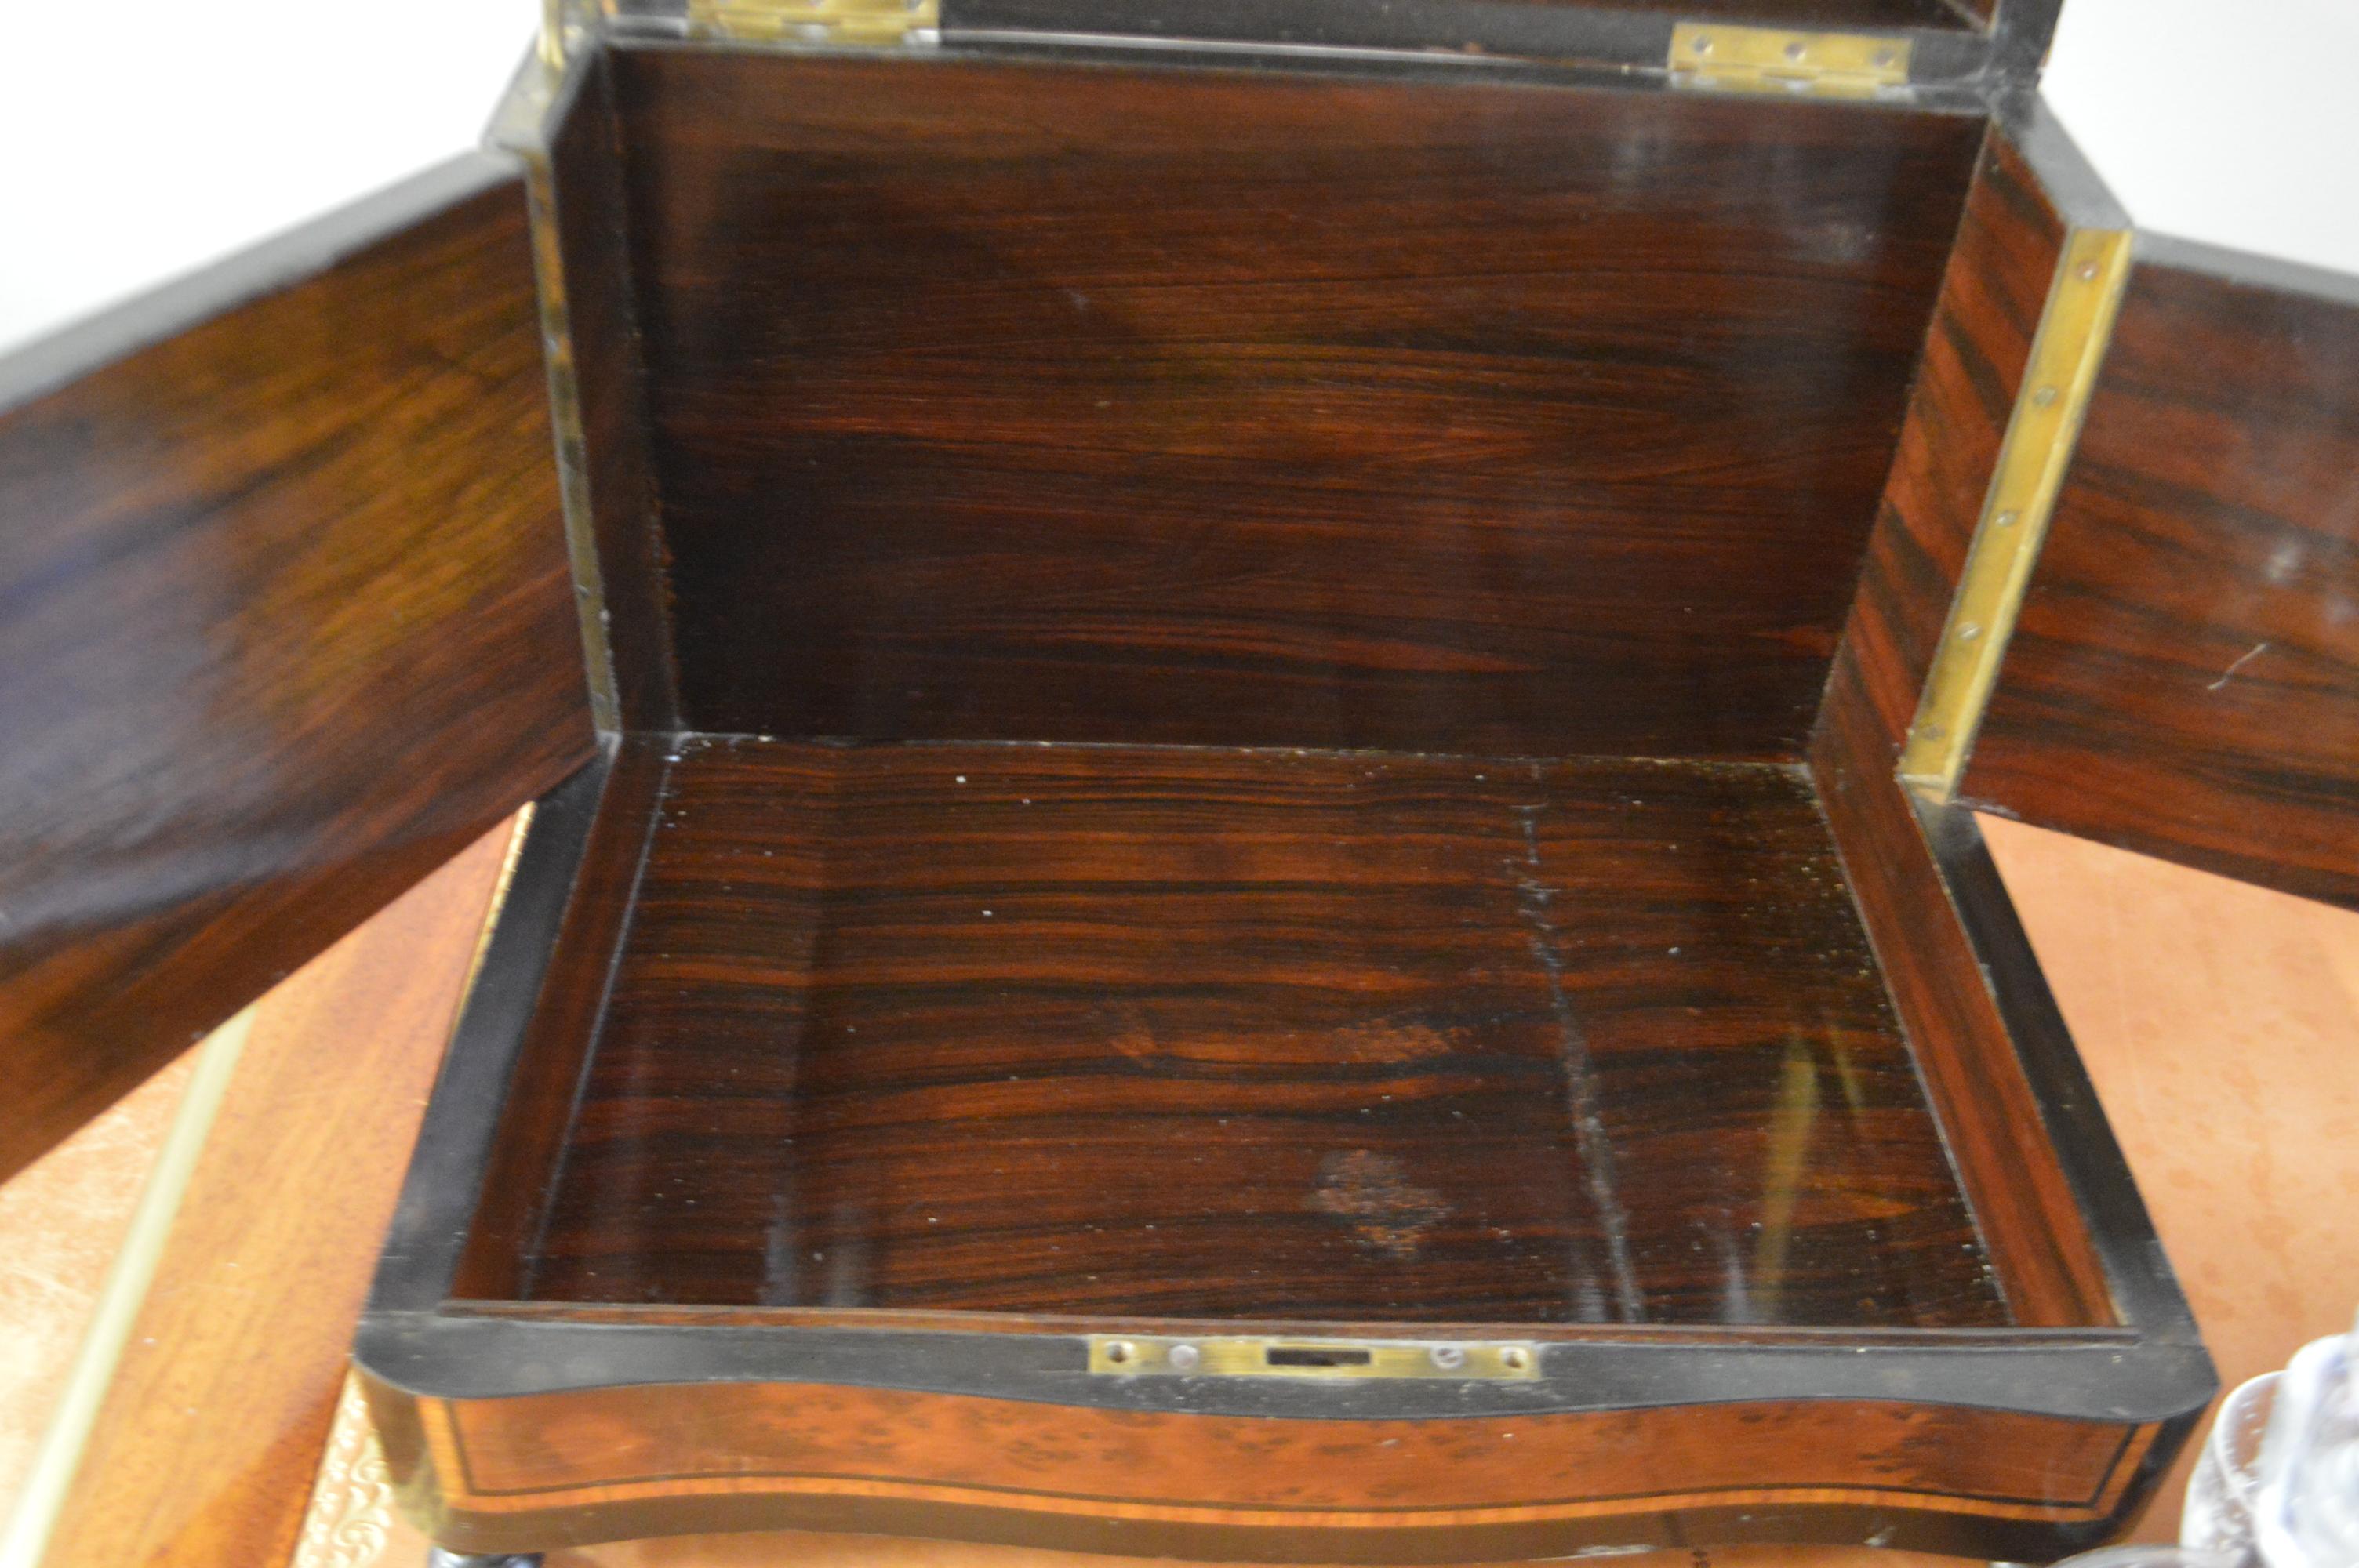 19th Century Portable Bar in a Burled Rosewood Box with Original Crystal Ware im Angebot 2